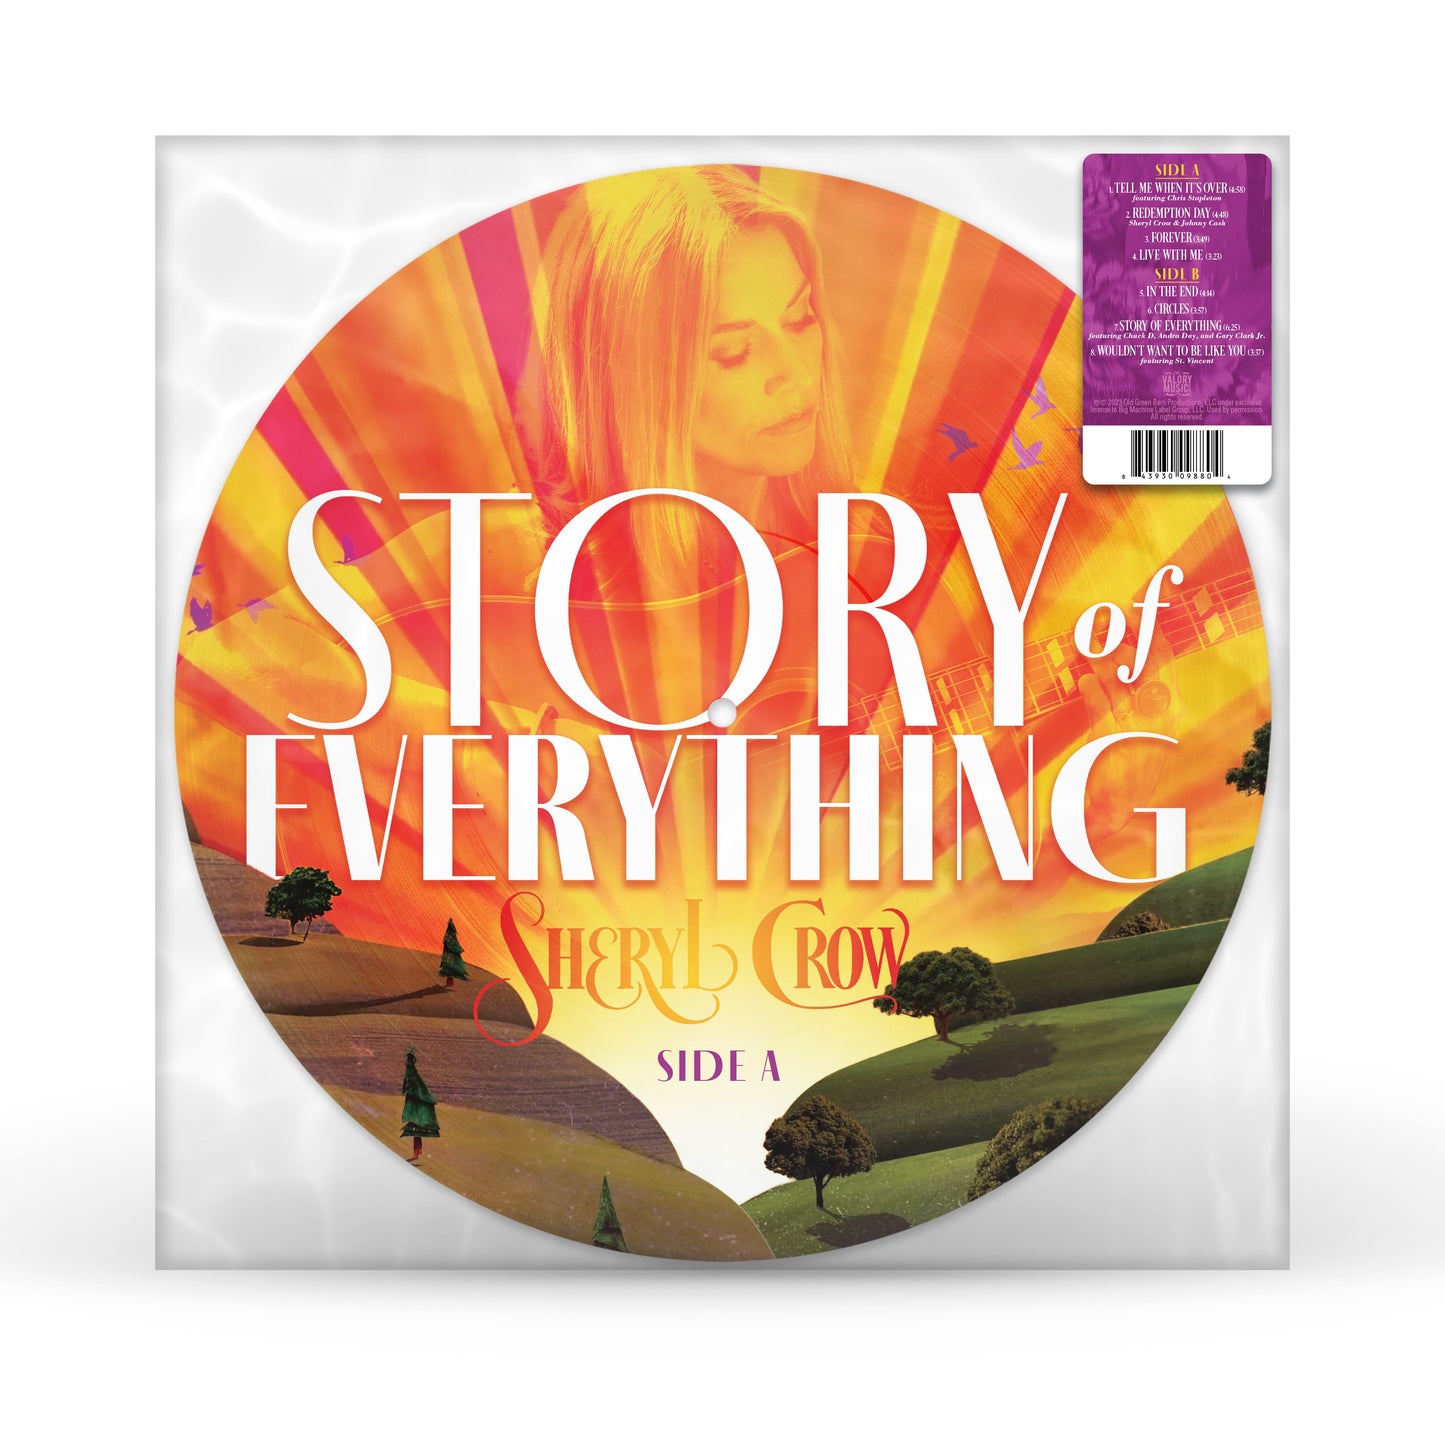 Sheryl Crow - Story Of Everything [Picture Disc LP]